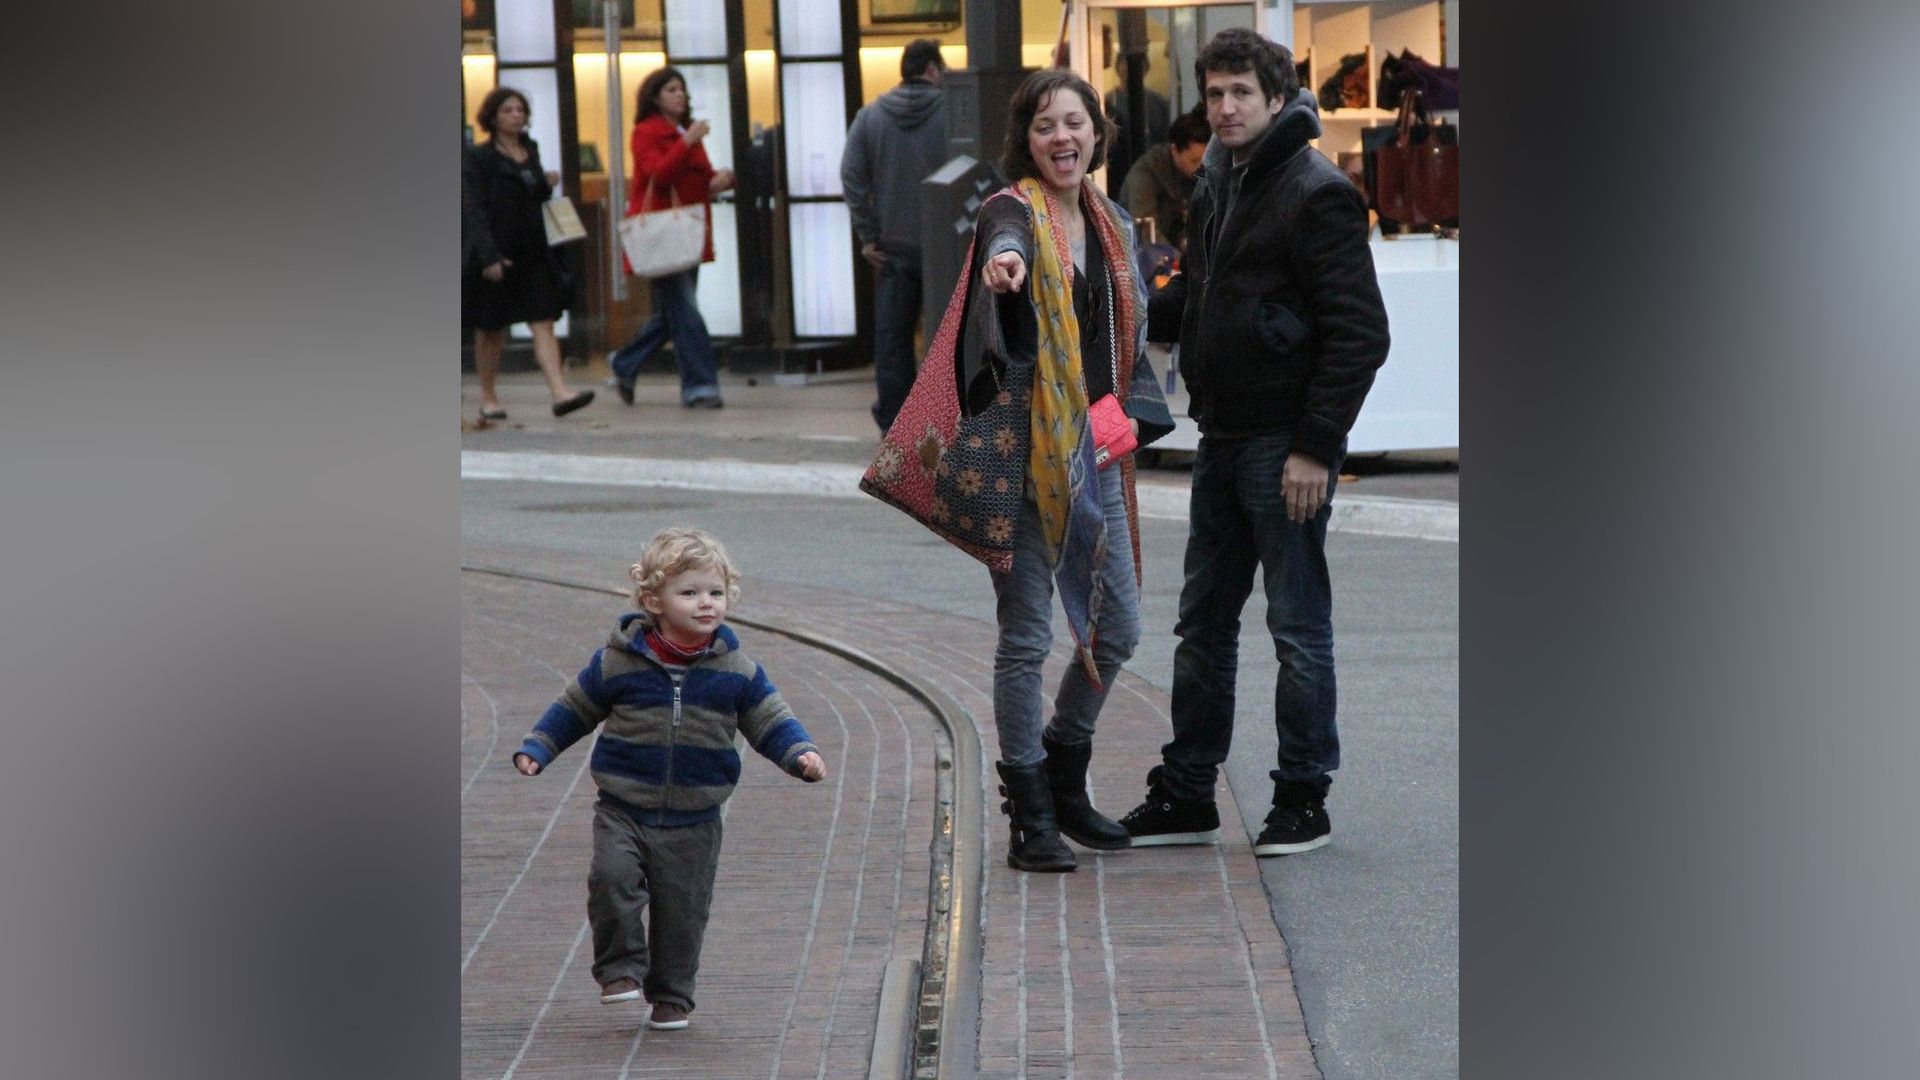 Marion Cotillard with her husband and son